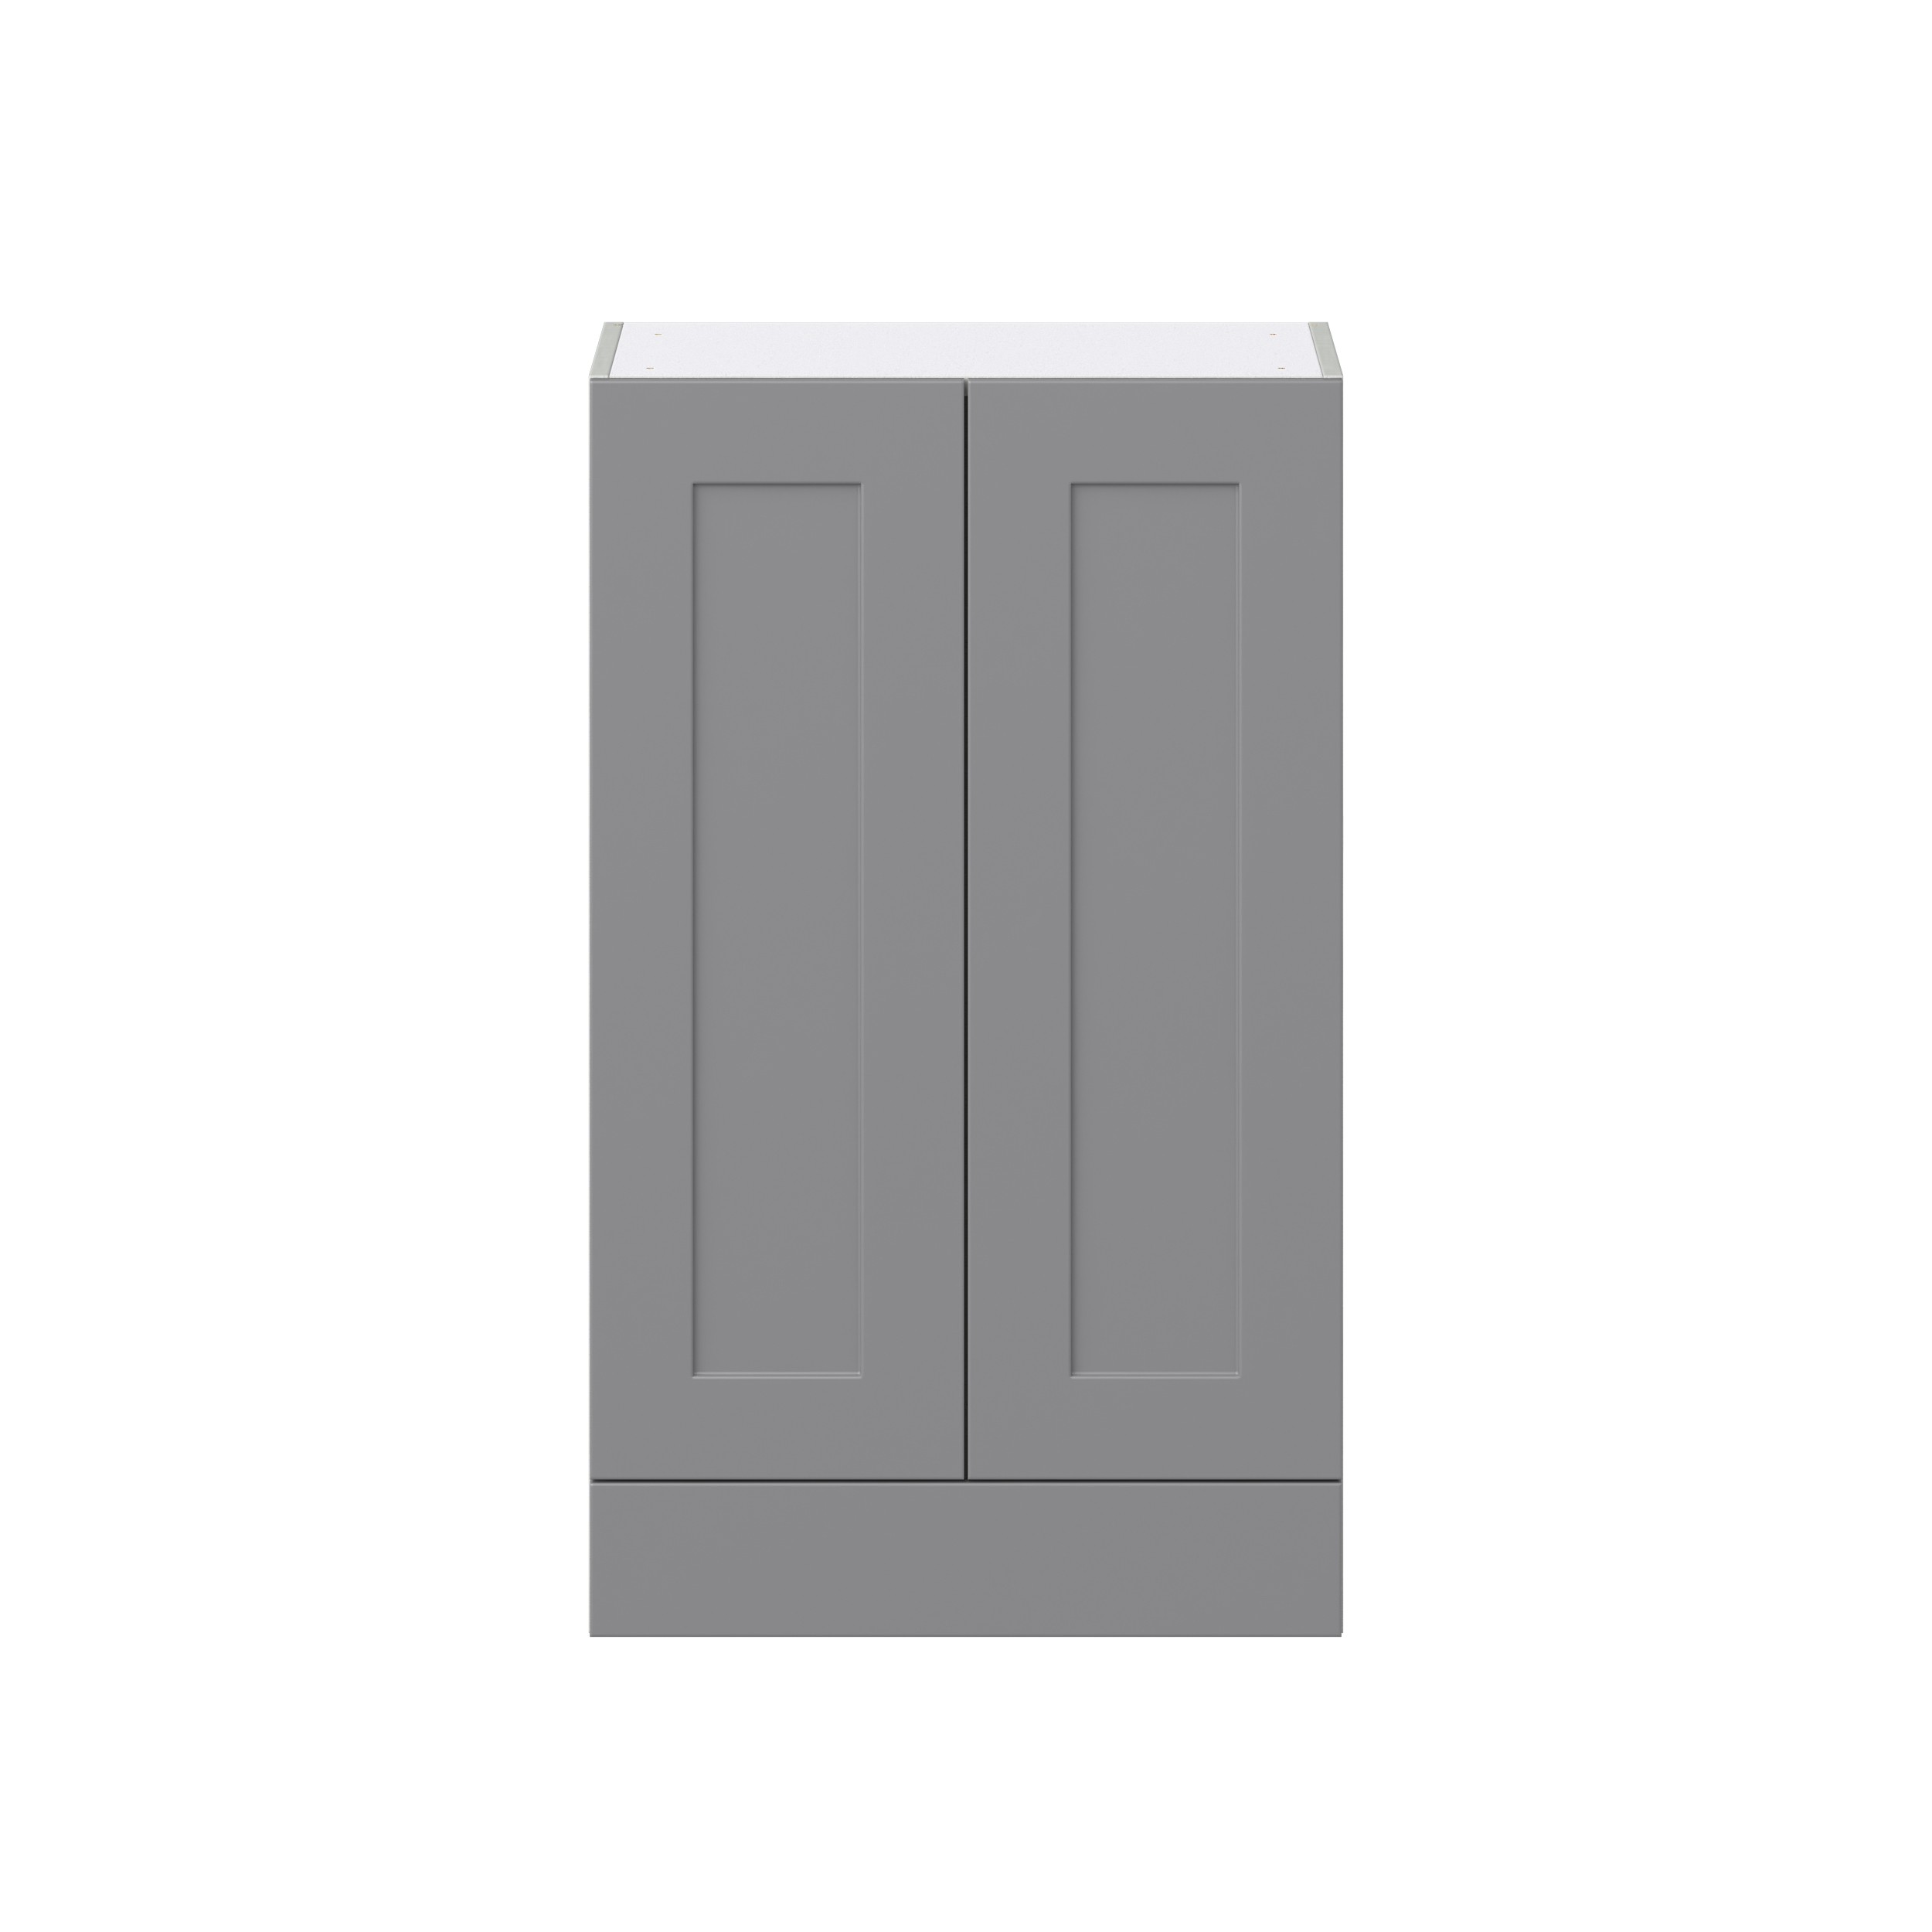 Willow Painted Slate Gray Shaker Assembled Wall Cabinet with 2 Doors and a 5 in. Drawer (24 in. W x 40 in. H x 14 in. D)